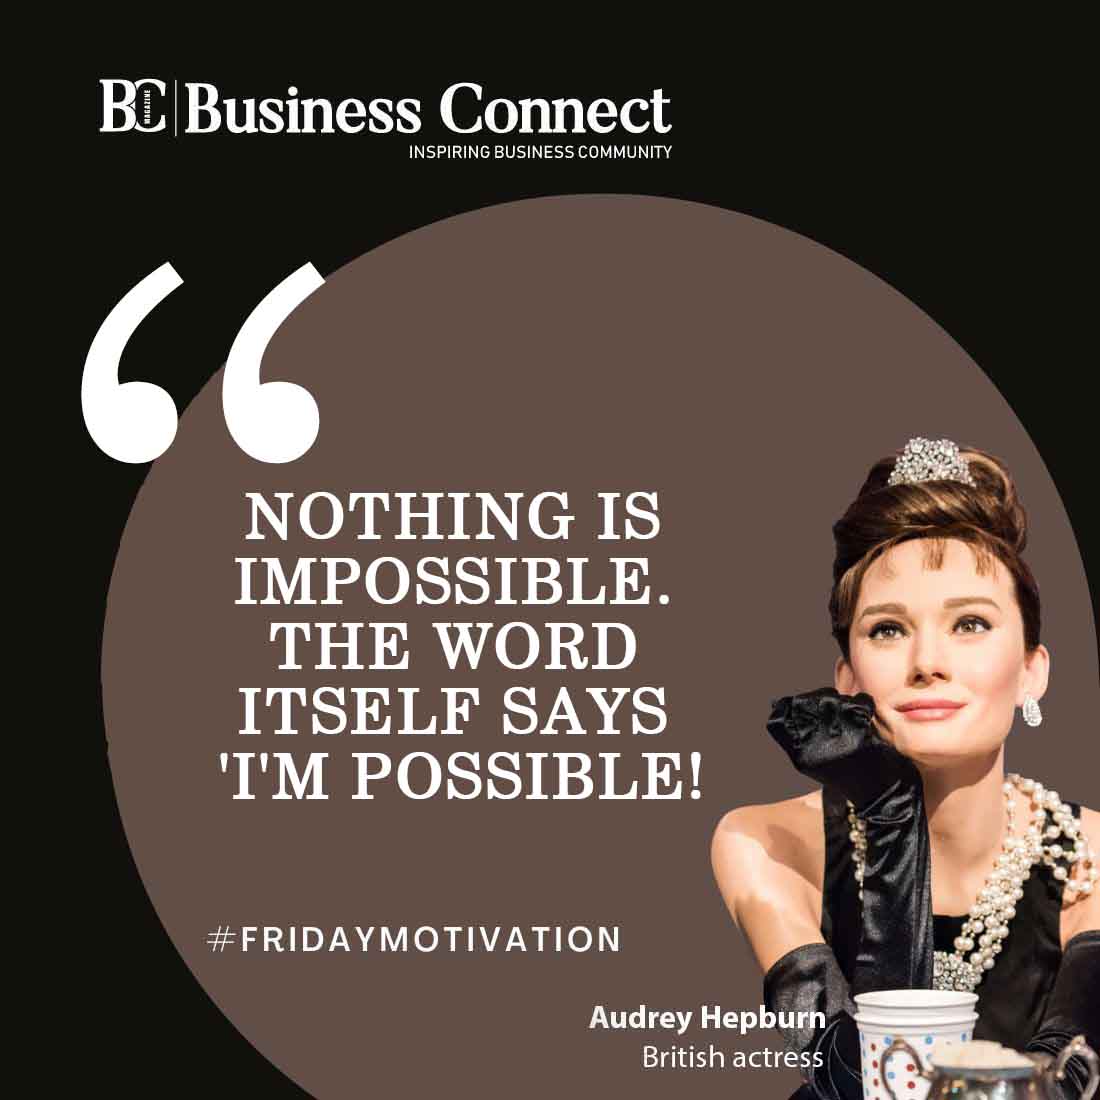 'Nothing is impossible. The word itself says 'I'm possible!''-Audrey Hepburn

#audreyhepburn #classicbeauty #timelessstyle #hollywoodicon #vintageglam #audreyinspiration #fashionlegend #filmicon #quote #elegancepersonified #breakfastattiffanys #gracefulactress  #today